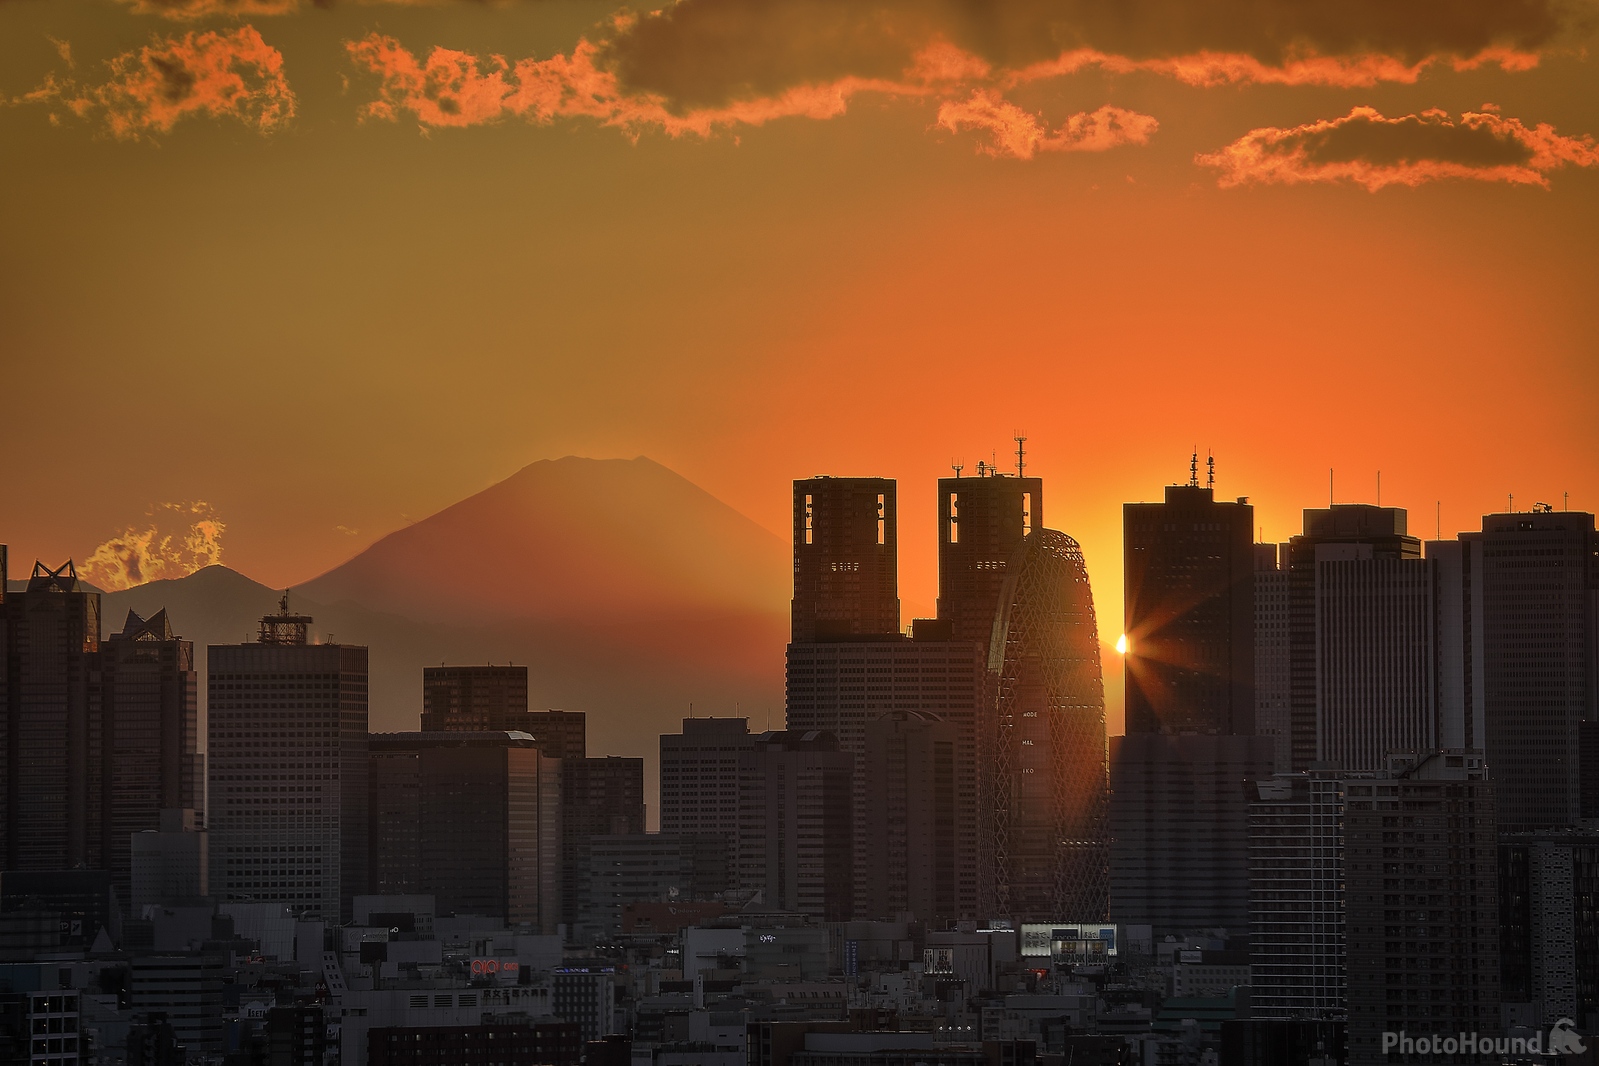 Image of Mount Fuji from Bunkyo Civic Centre Observation Deck by Andrew Hartsell